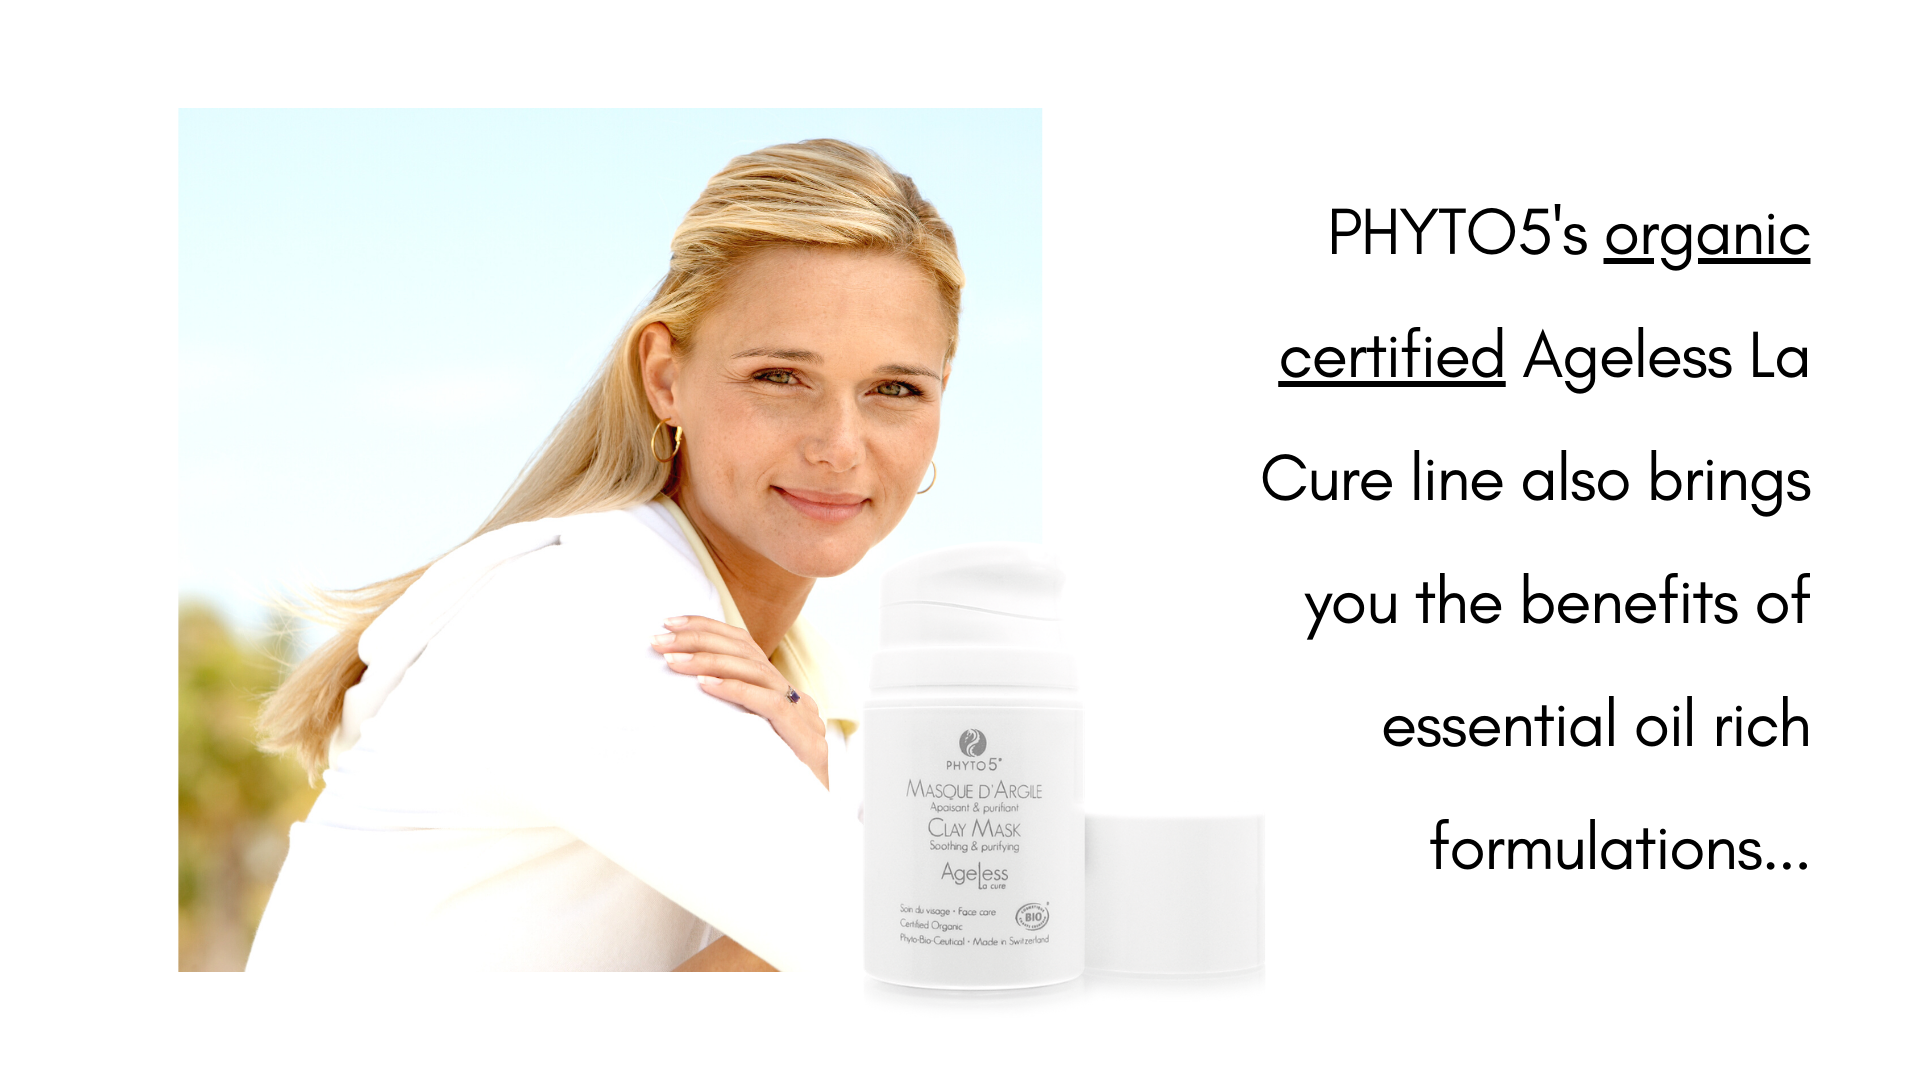 phyto5-makes-organic-certified-ageless-la-cure.png